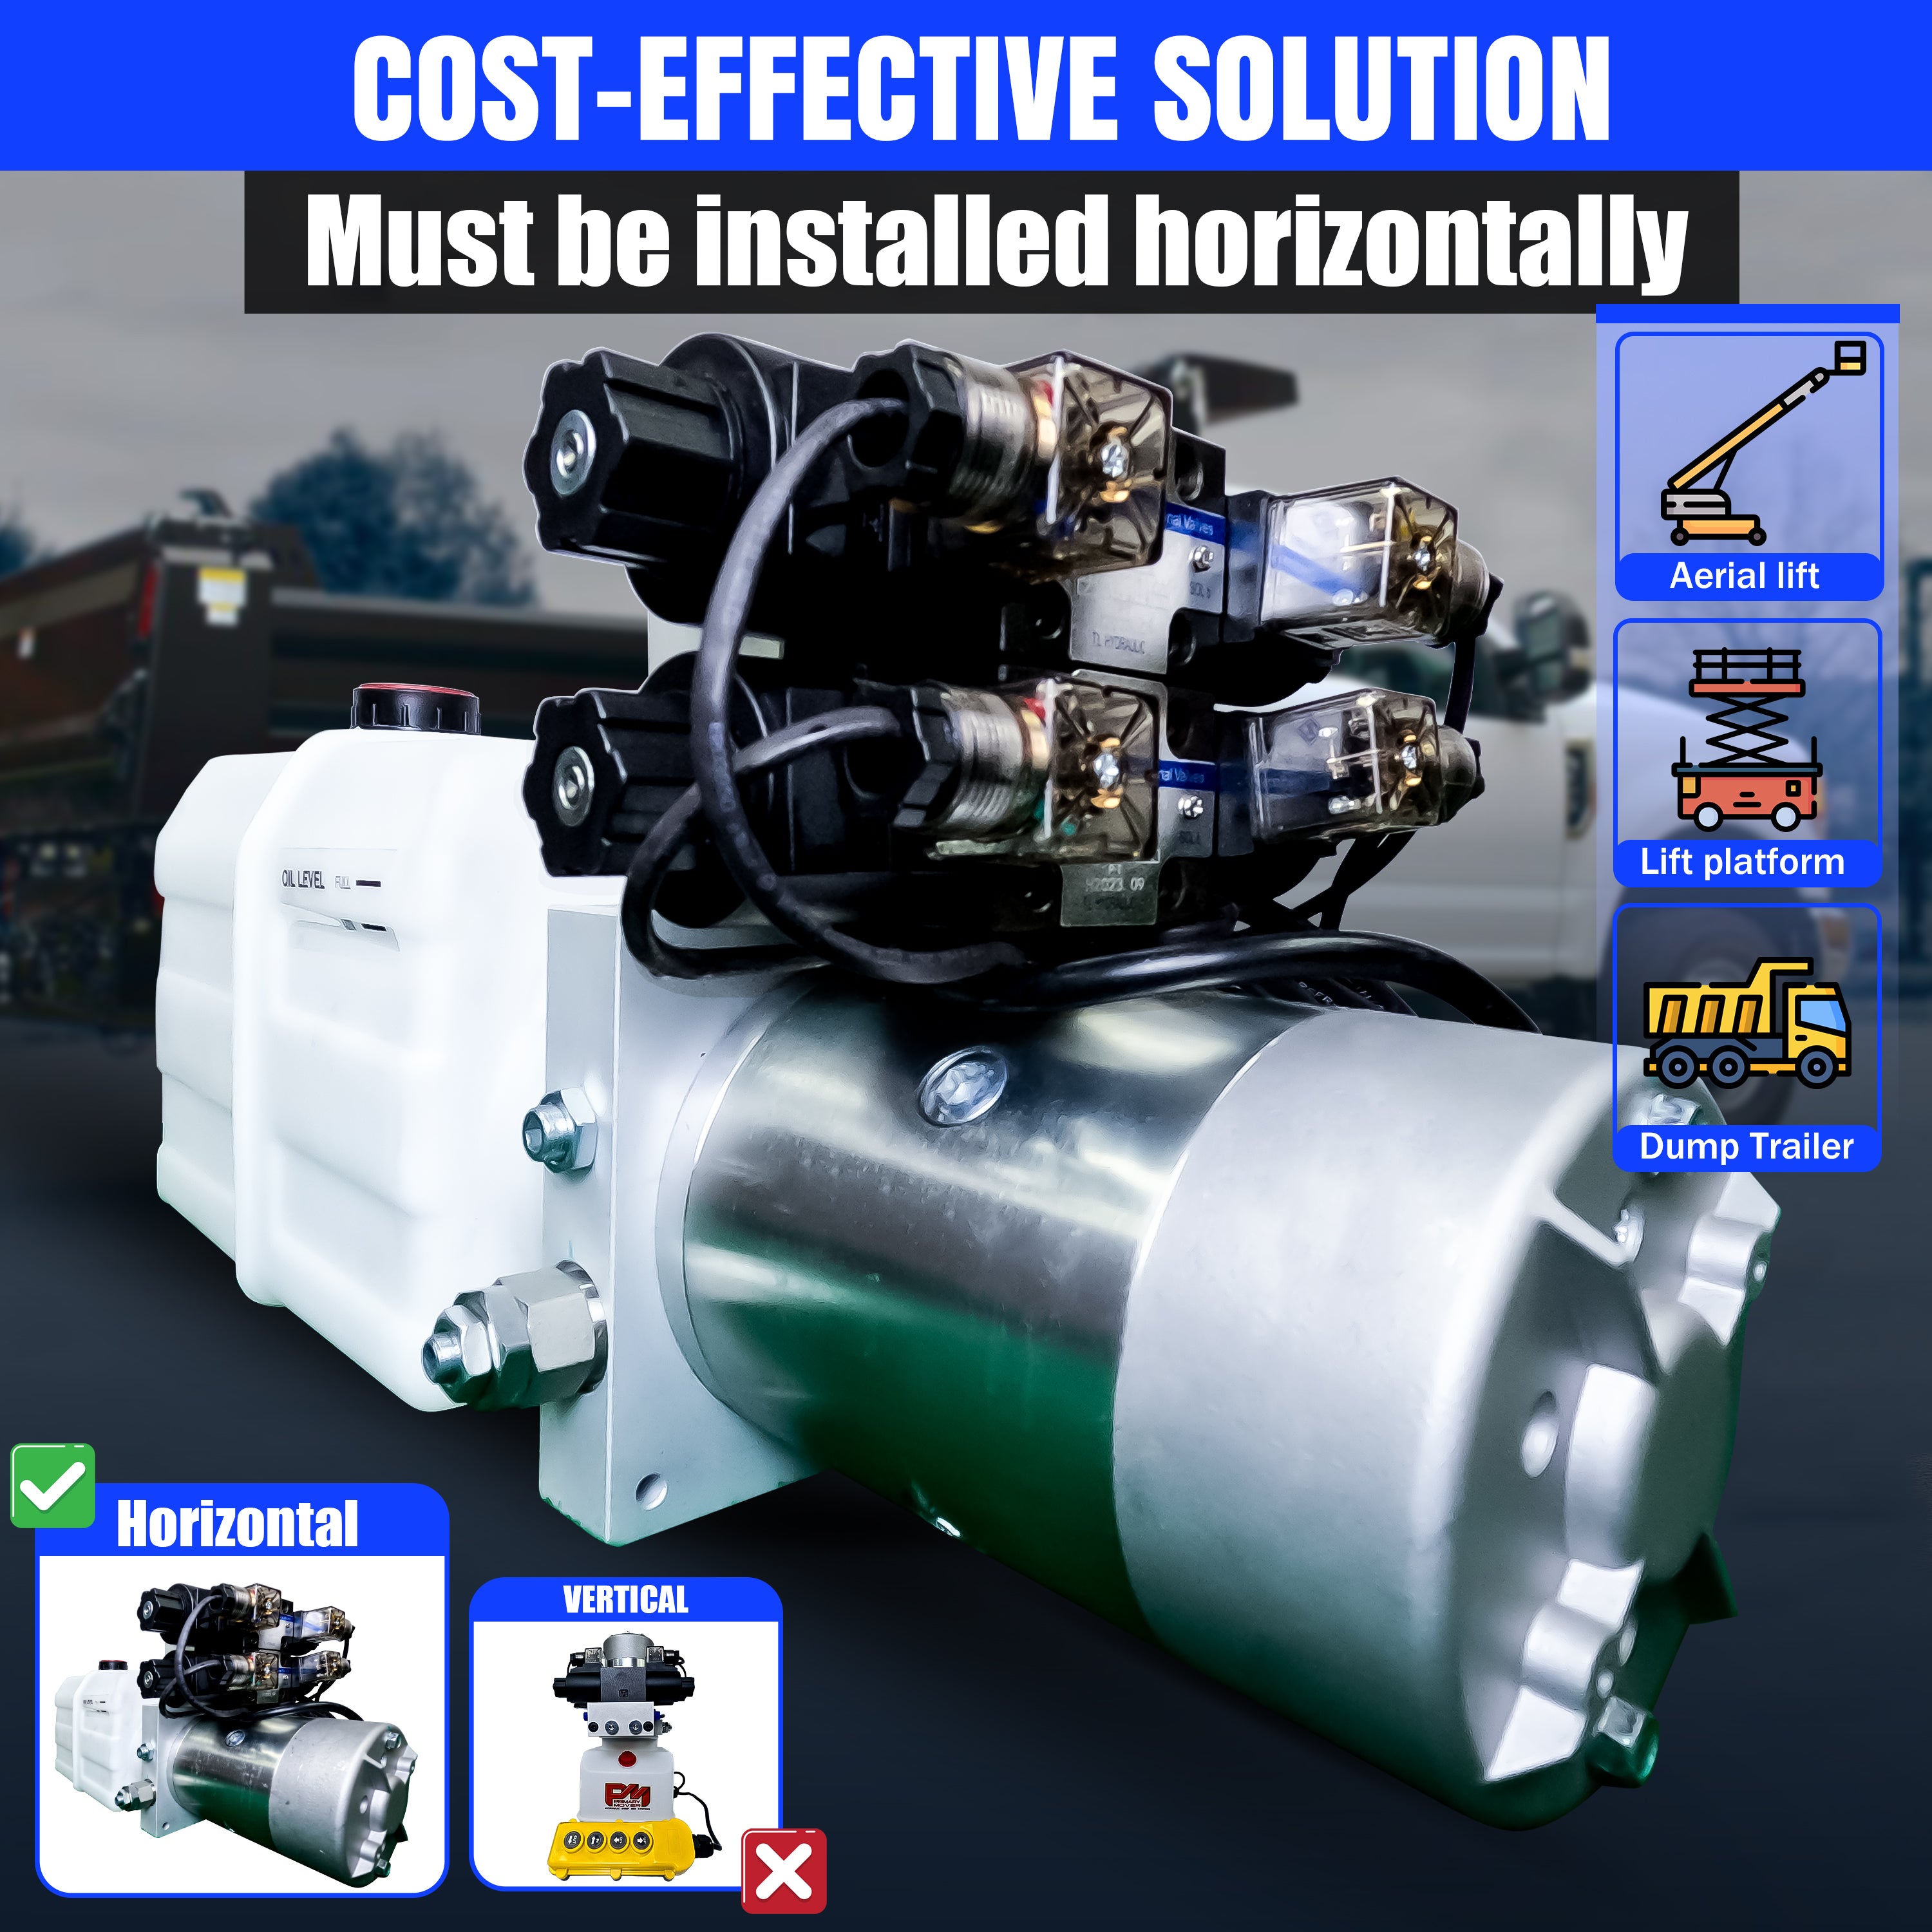 Compact Dual Double Hydraulic Power Unit for dump trailers and trucks, enabling four hydraulic actions simultaneously. Robust, efficient, and versatile from PrimaryMover.com.